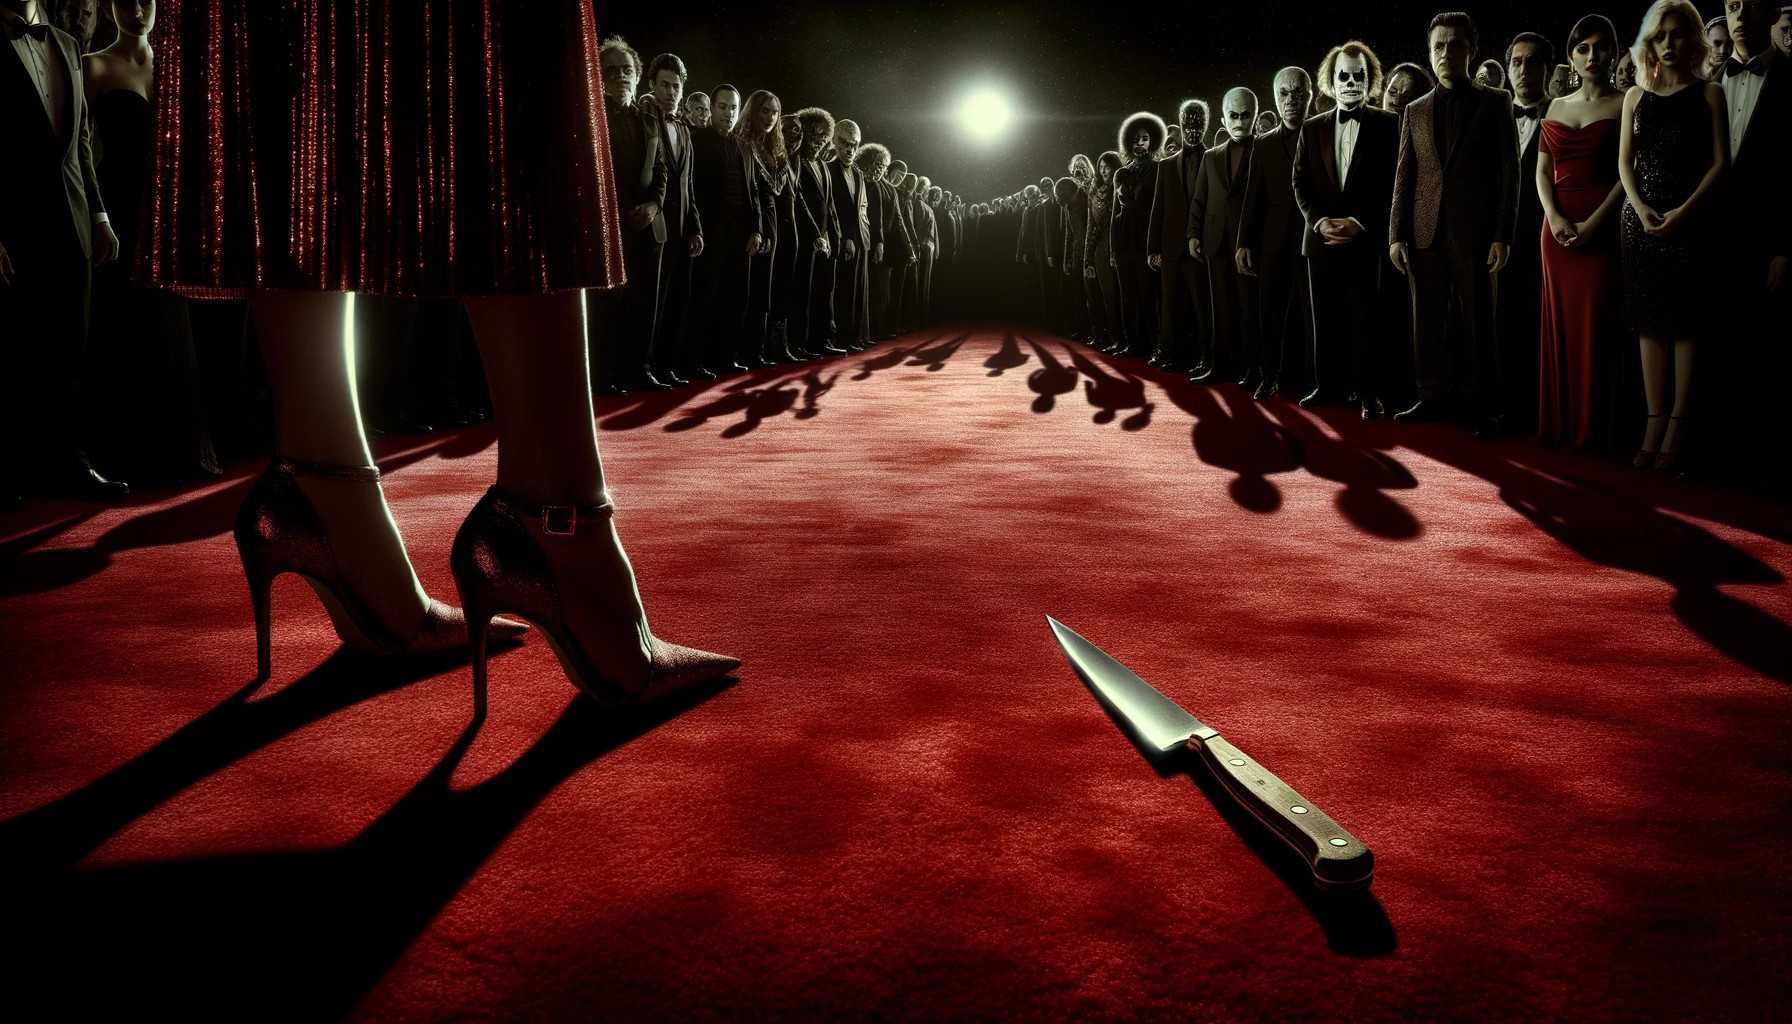 Murder mystery game scene with a weapon laying at the feet of a luxuriously dressed women in heels on red carpet red carpet